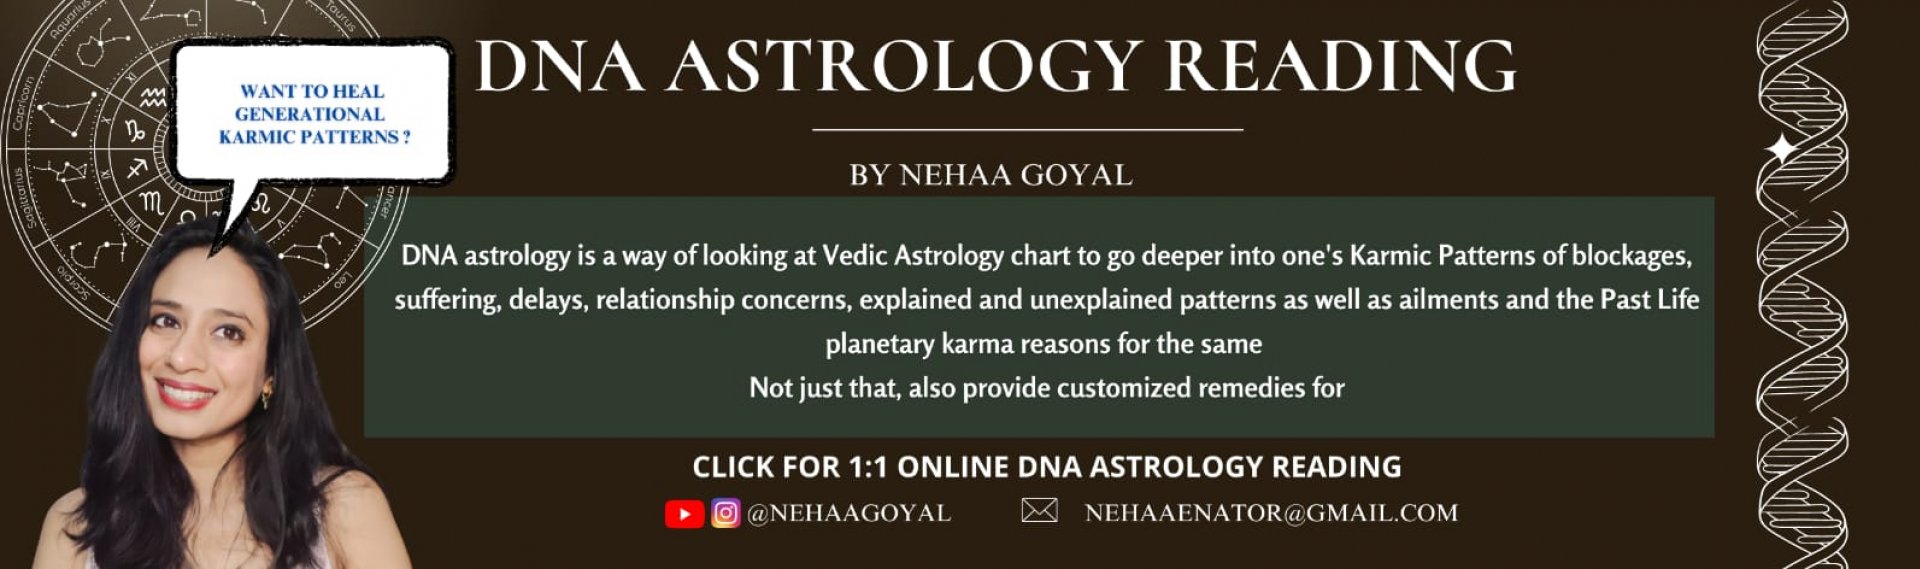 DNA Astrology reading	